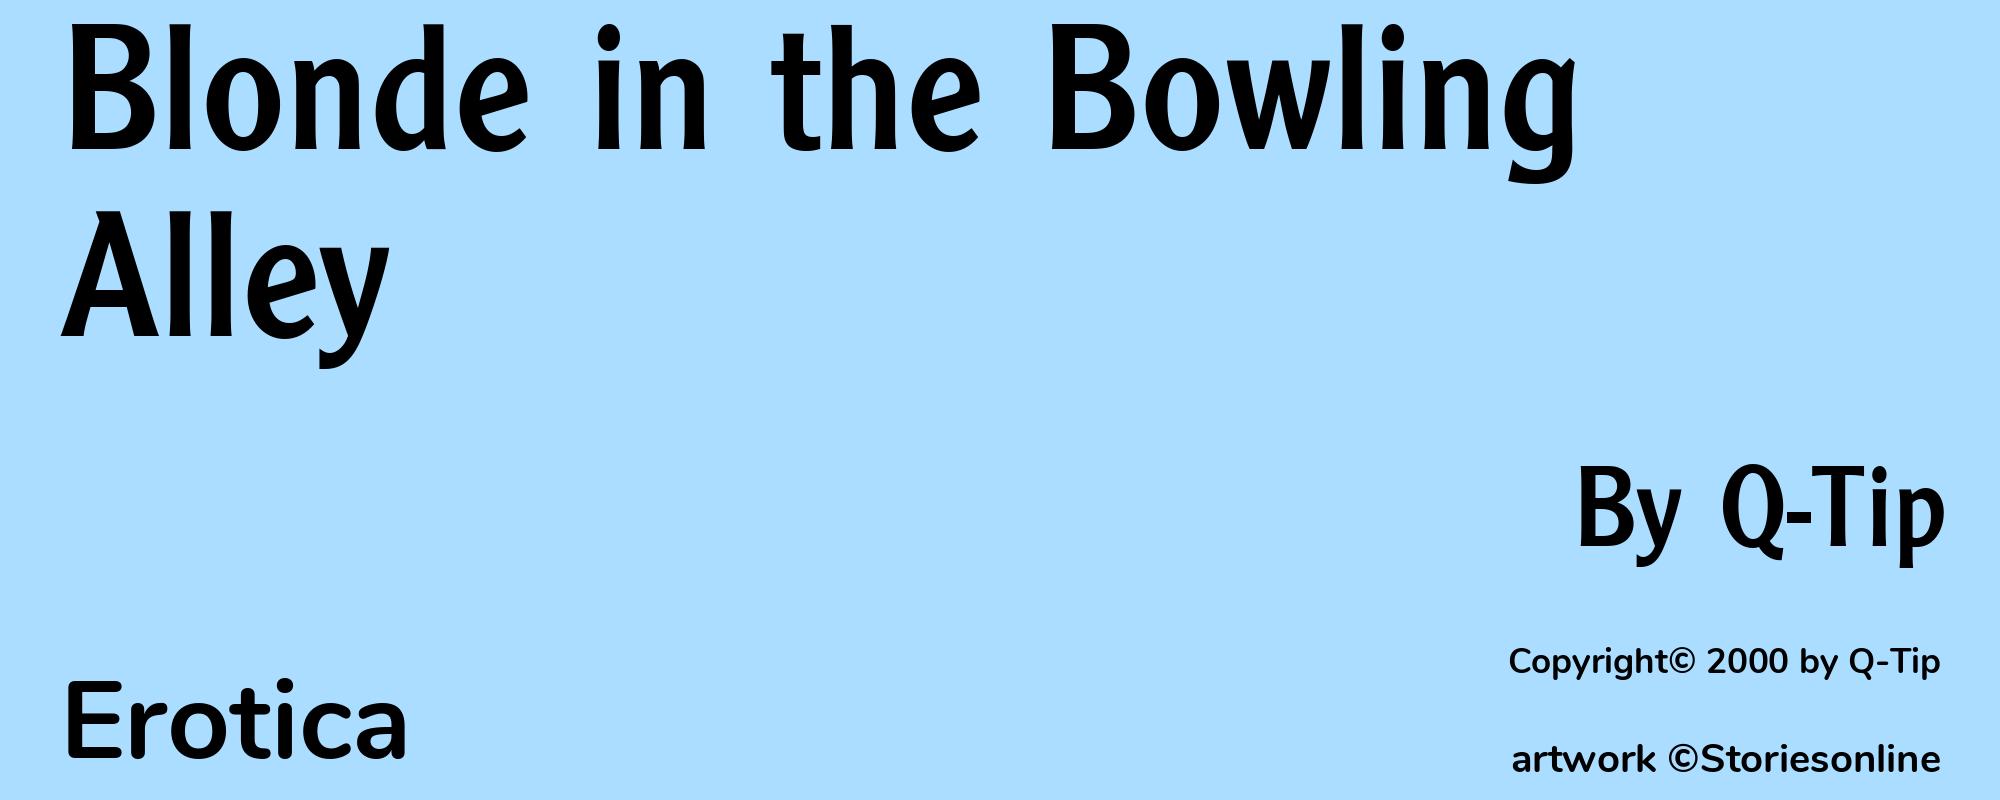 Blonde in the Bowling Alley - Cover